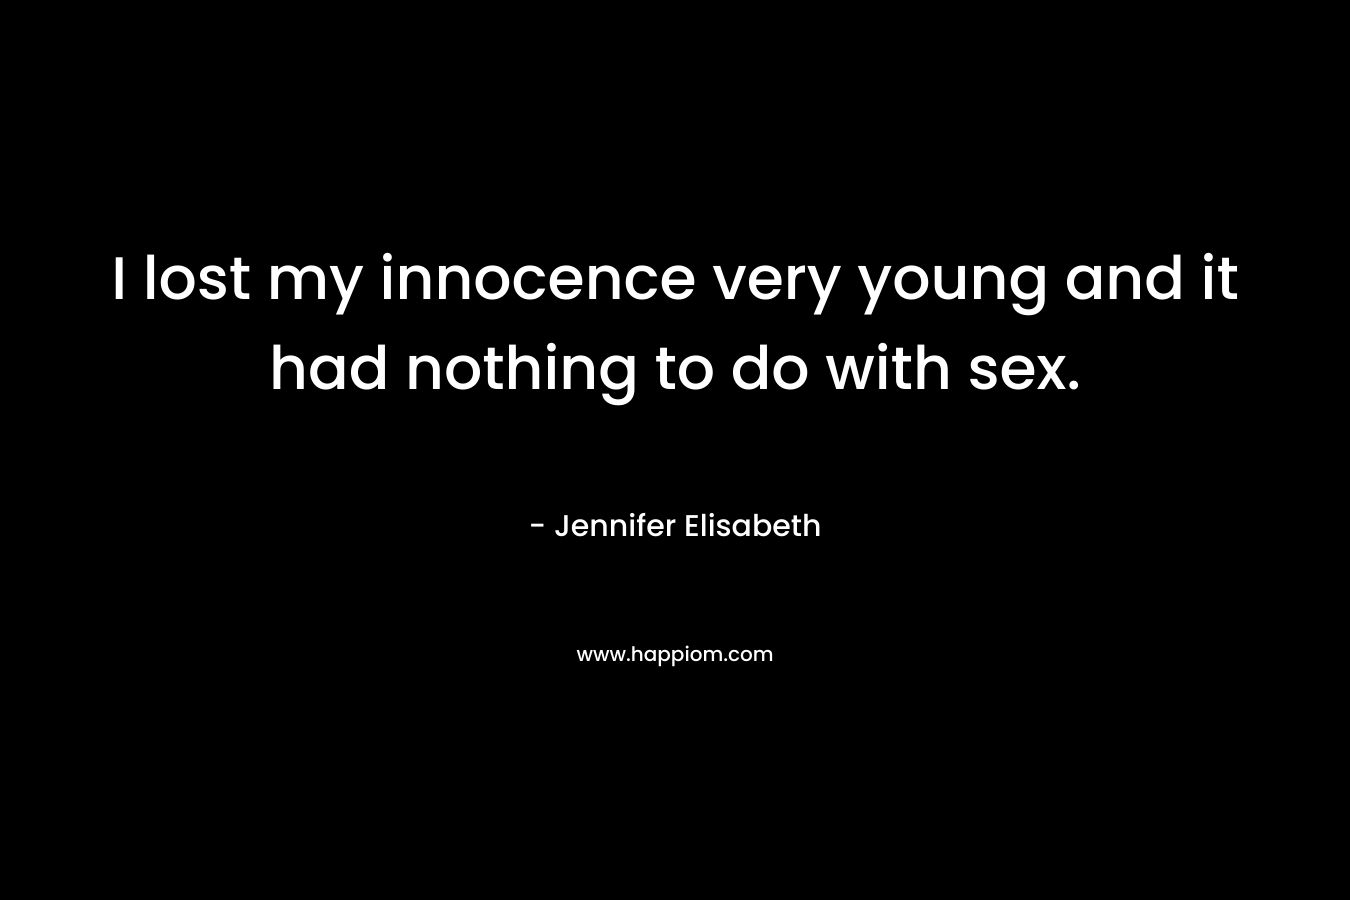 I lost my innocence very young and it had nothing to do with sex.